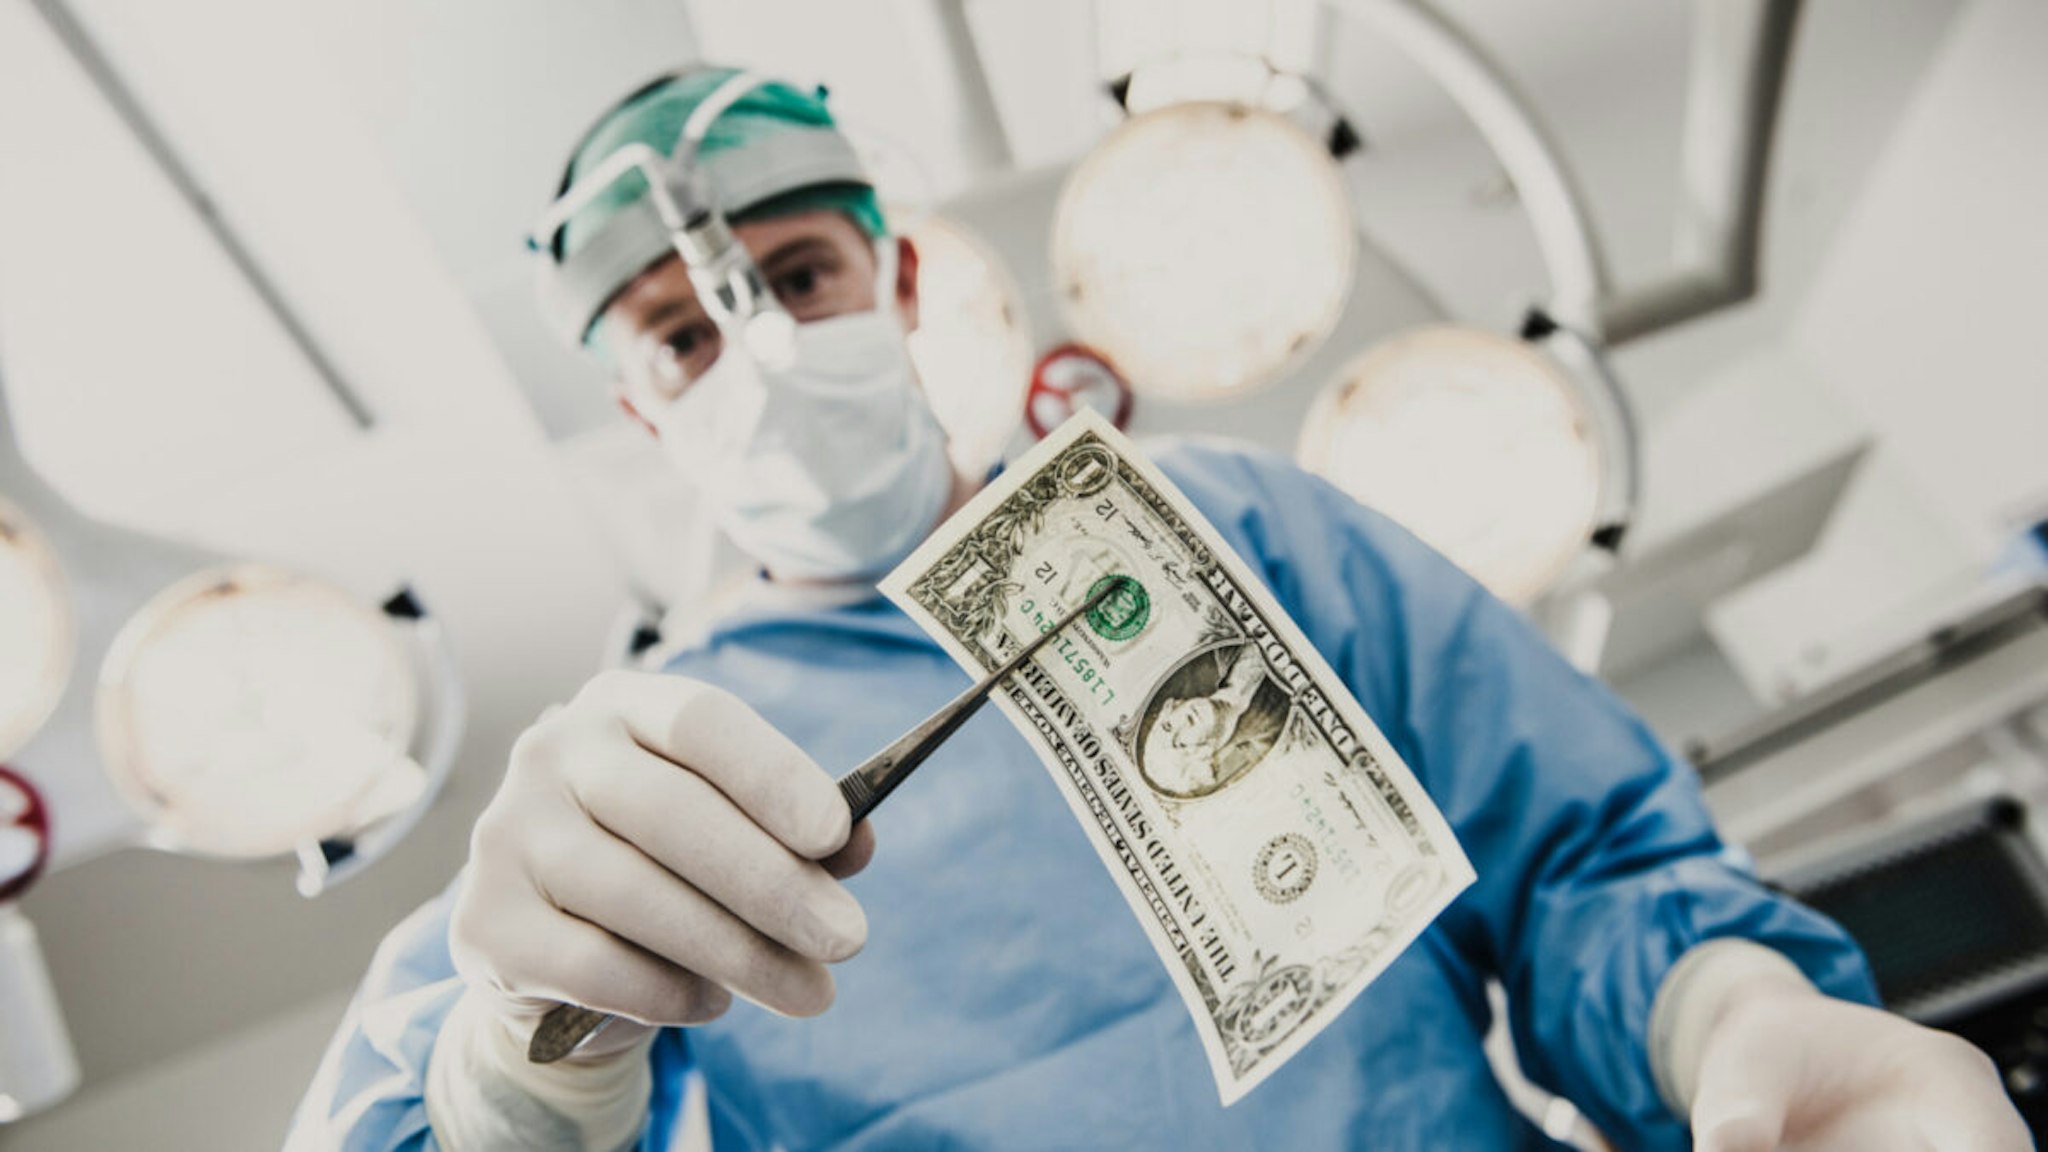 Doctor doing surgery in hospital with money - stock photo.